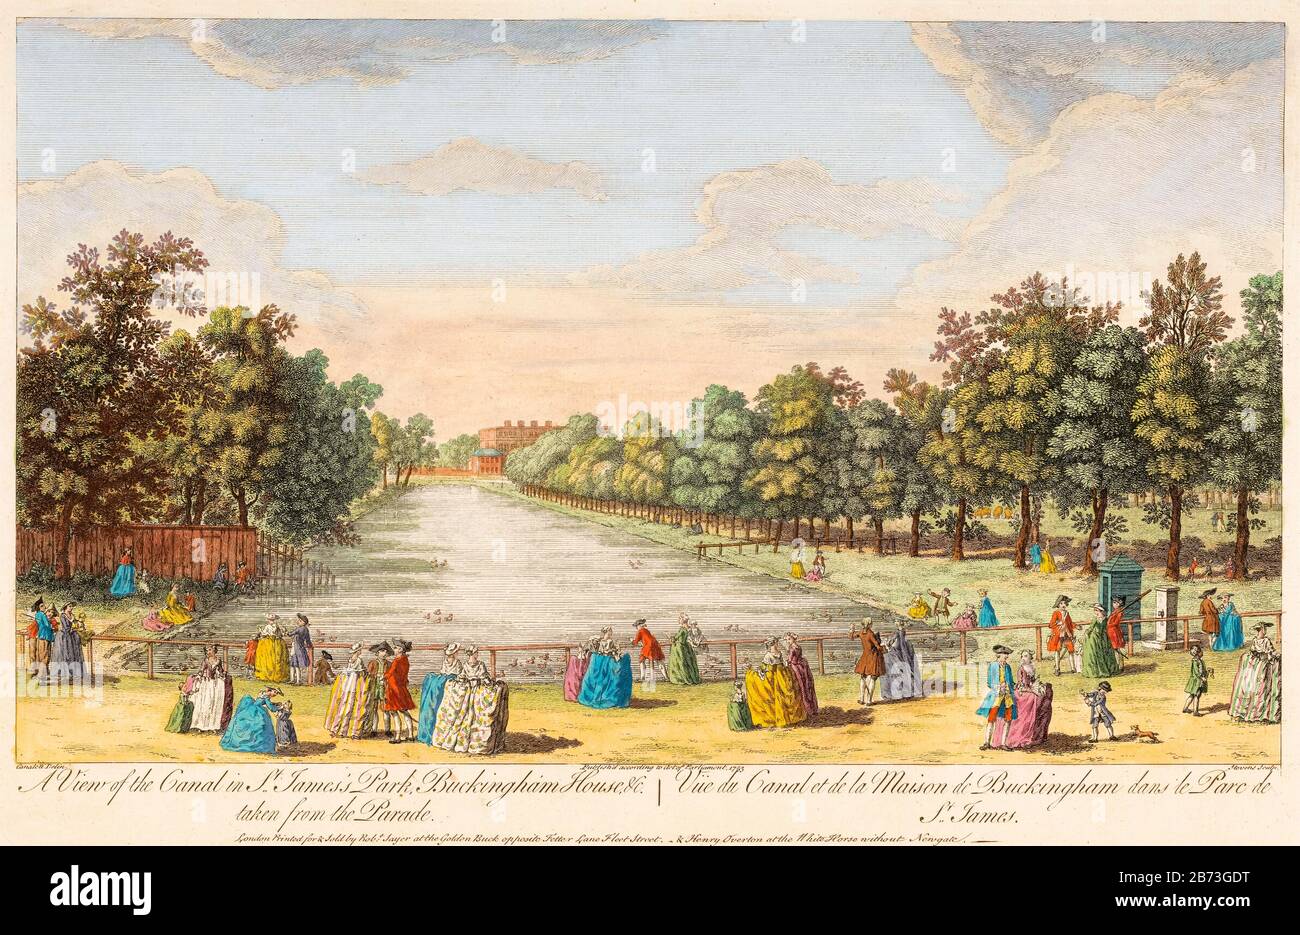 View of the Canal in St James's Park and Buckingham Palace, London, from Horse Guard's Parade, 18th Century illustration by Robert Sayer, after Canaletto, 1753 Stock Photo